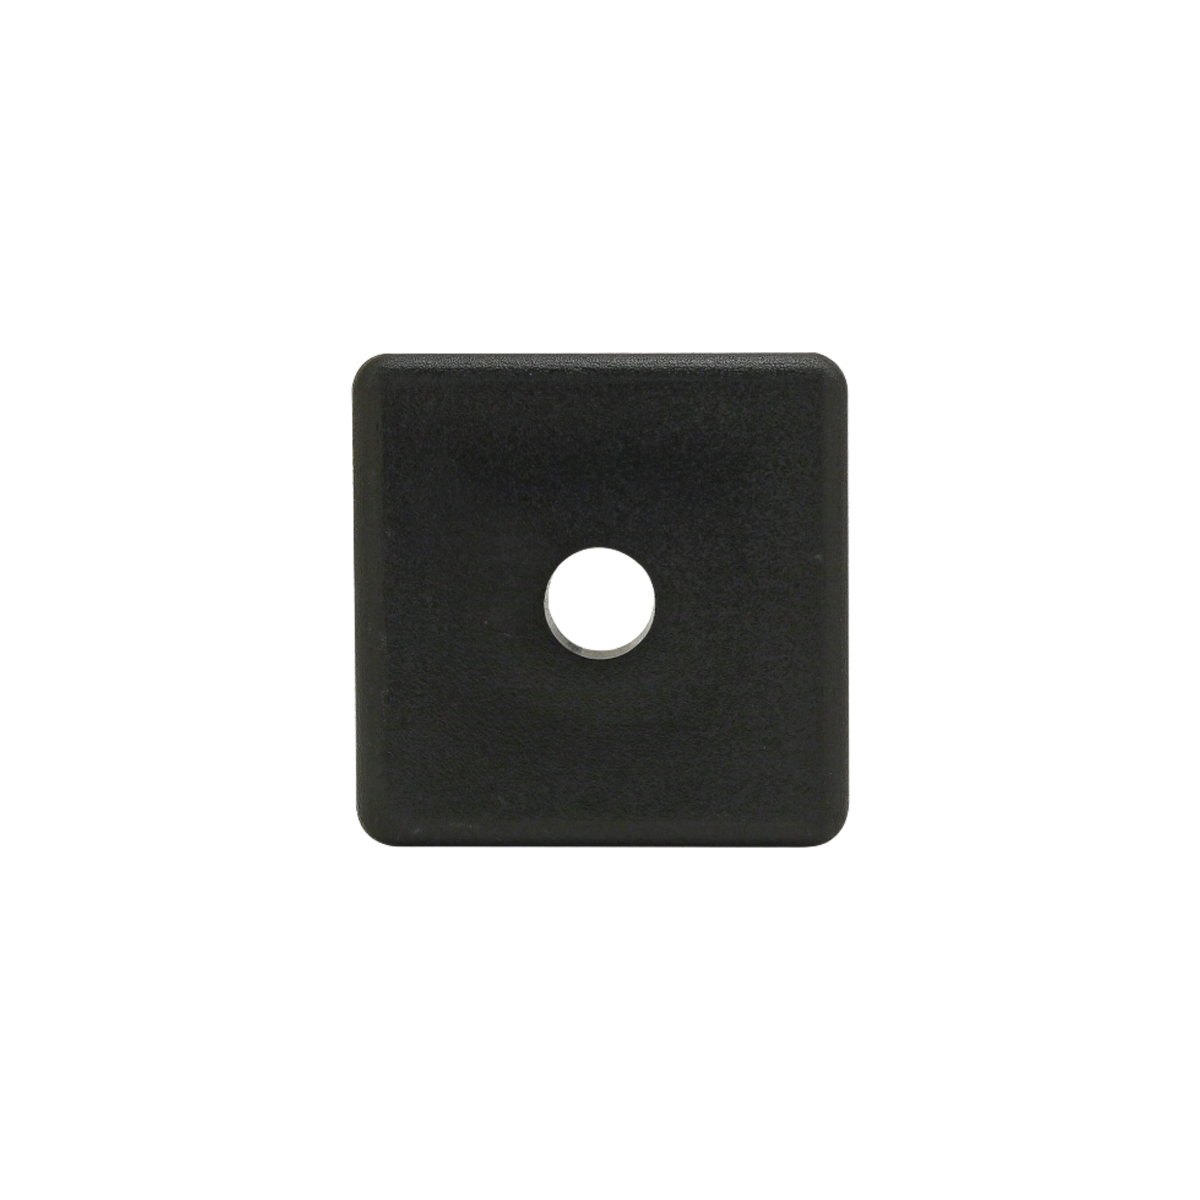 black square end cap with hole in the center